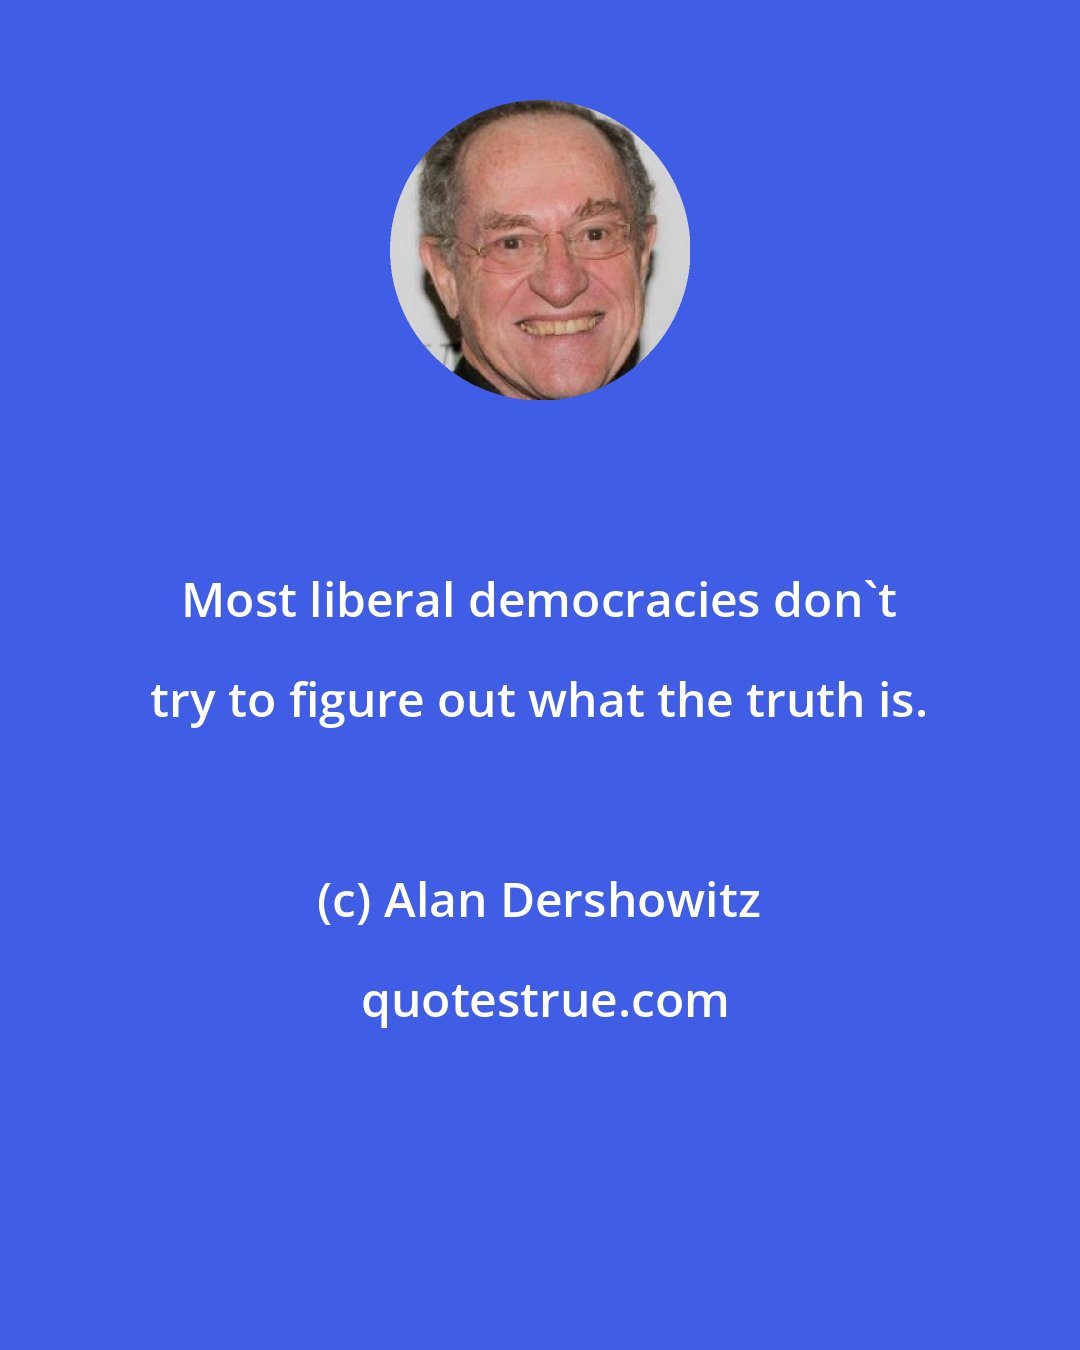 Alan Dershowitz: Most liberal democracies don't try to figure out what the truth is.